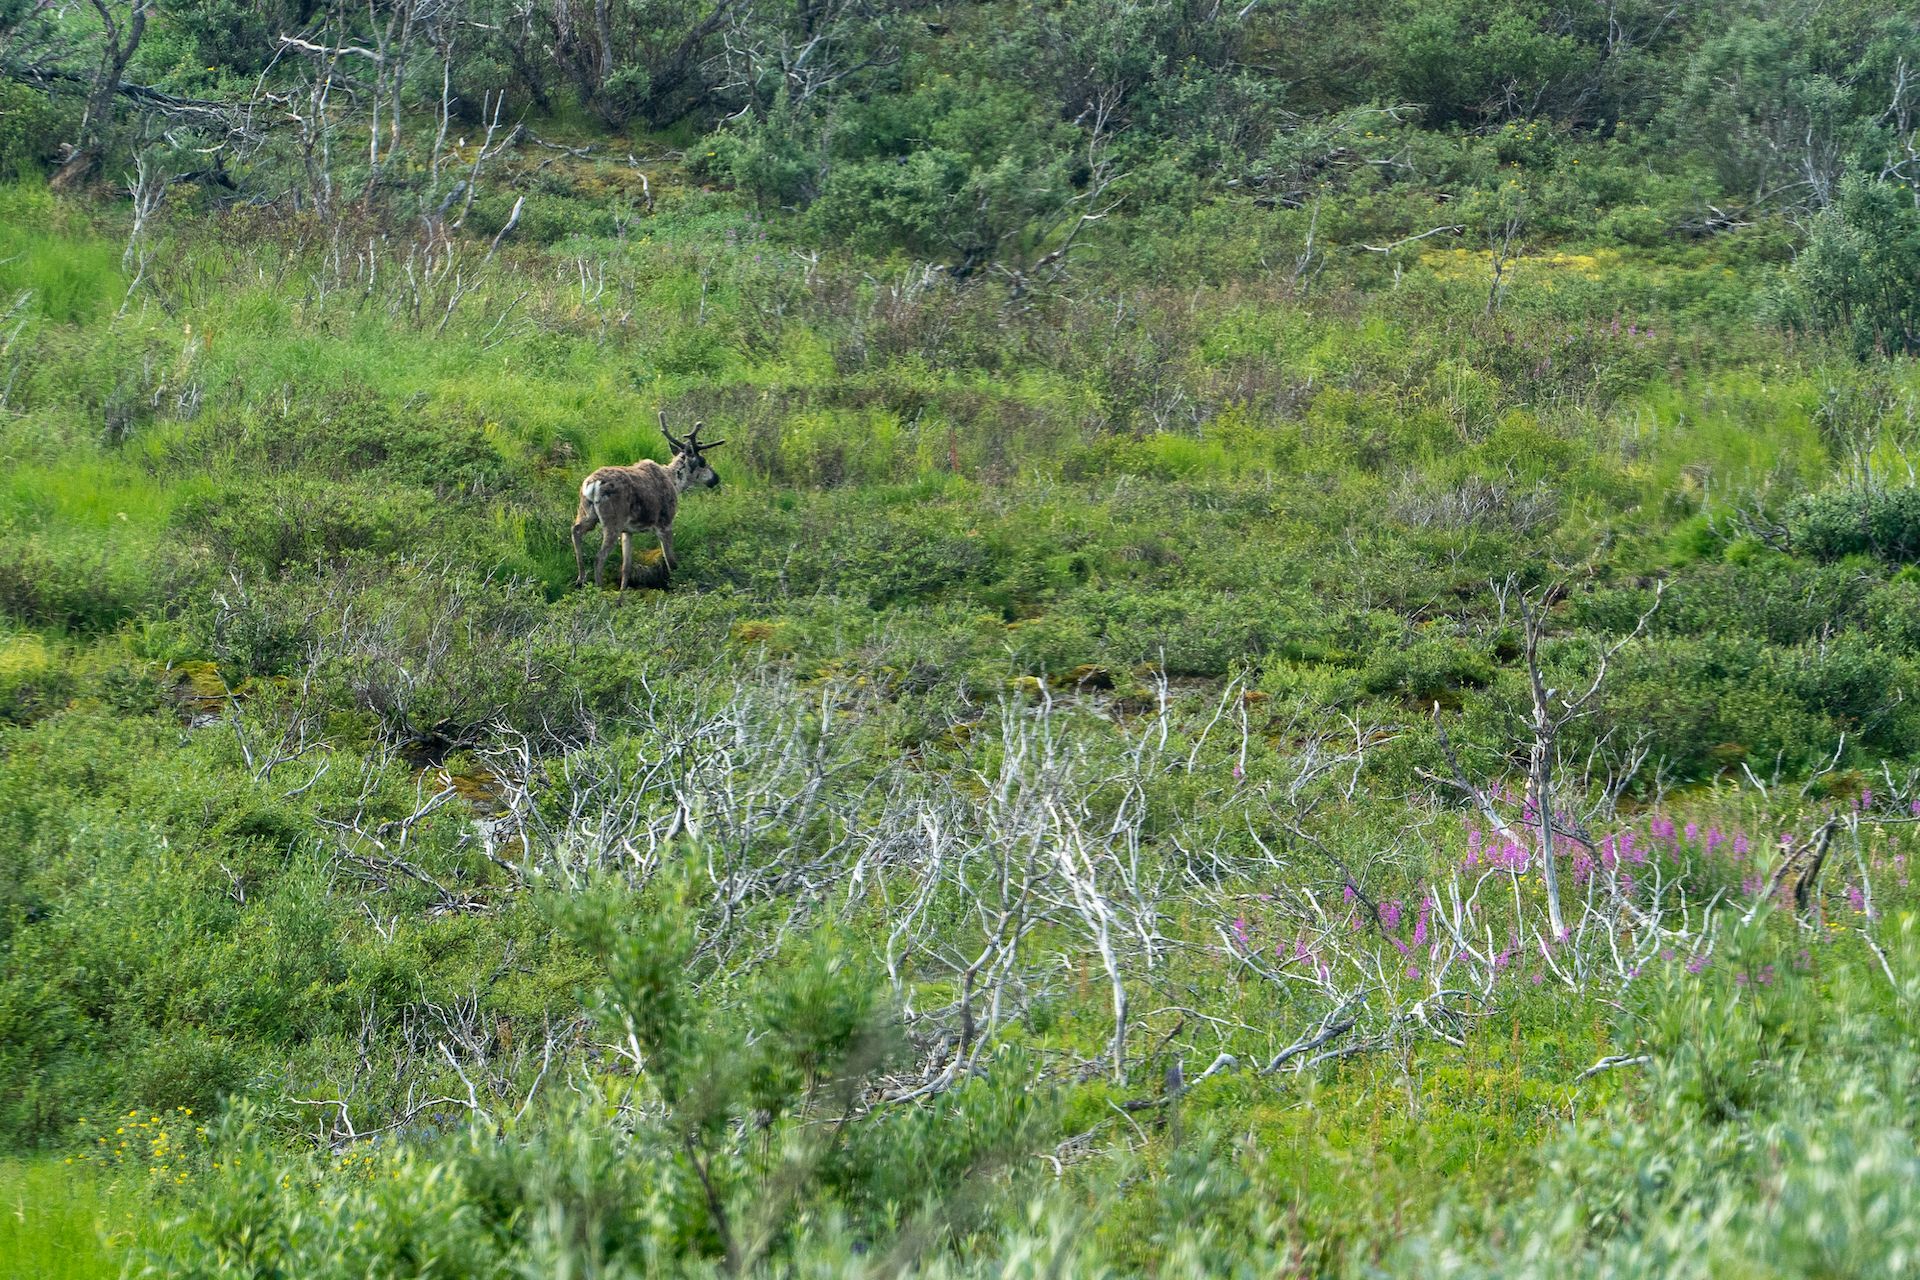 A caribou grazing in the tundra